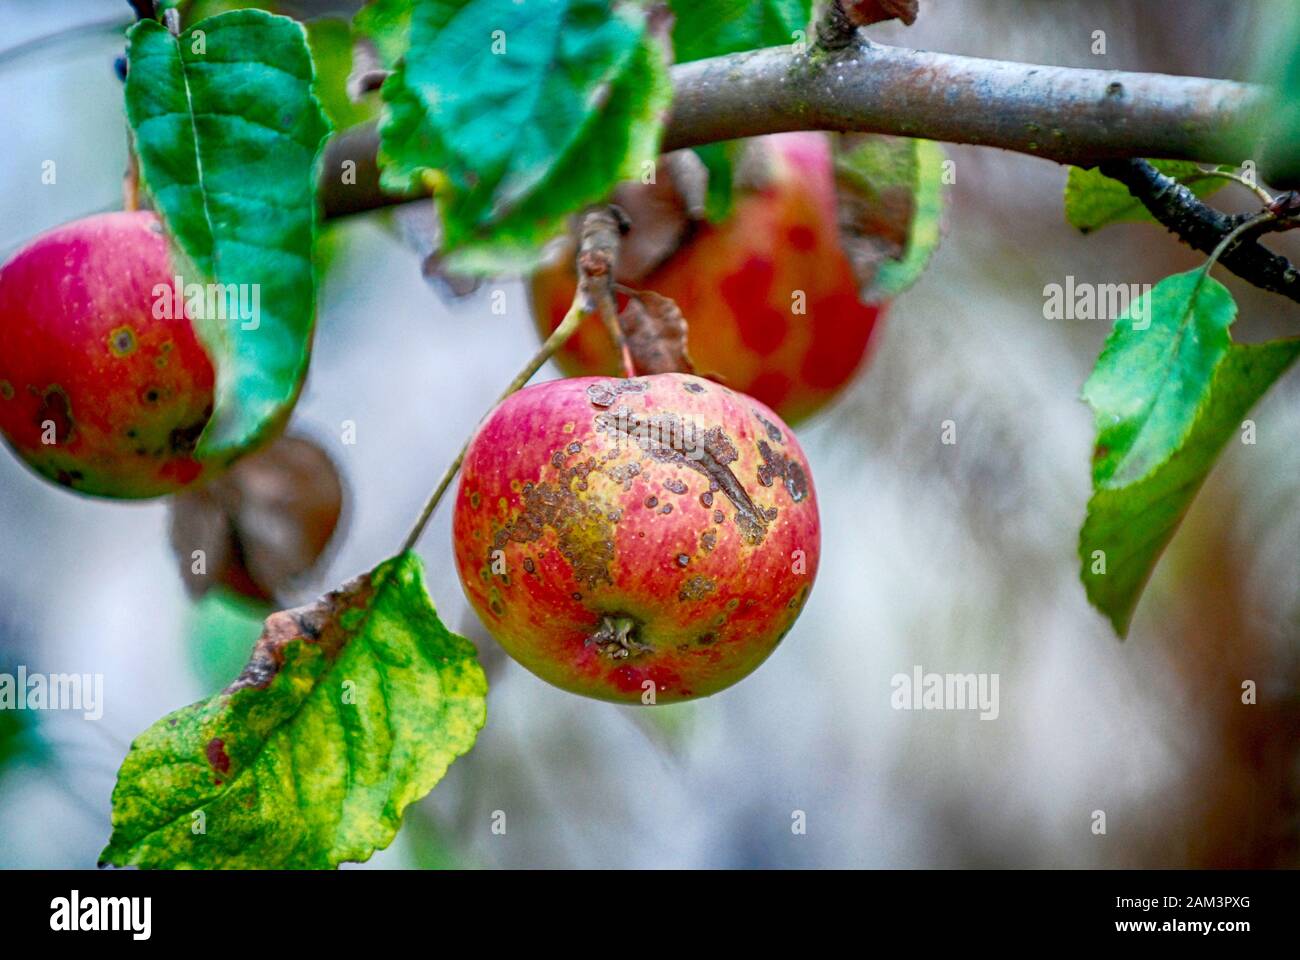 Necrotic spotting and cracking caused apple scab, Venturia inaequalis on a ripe apple on the tree image Stock Photo